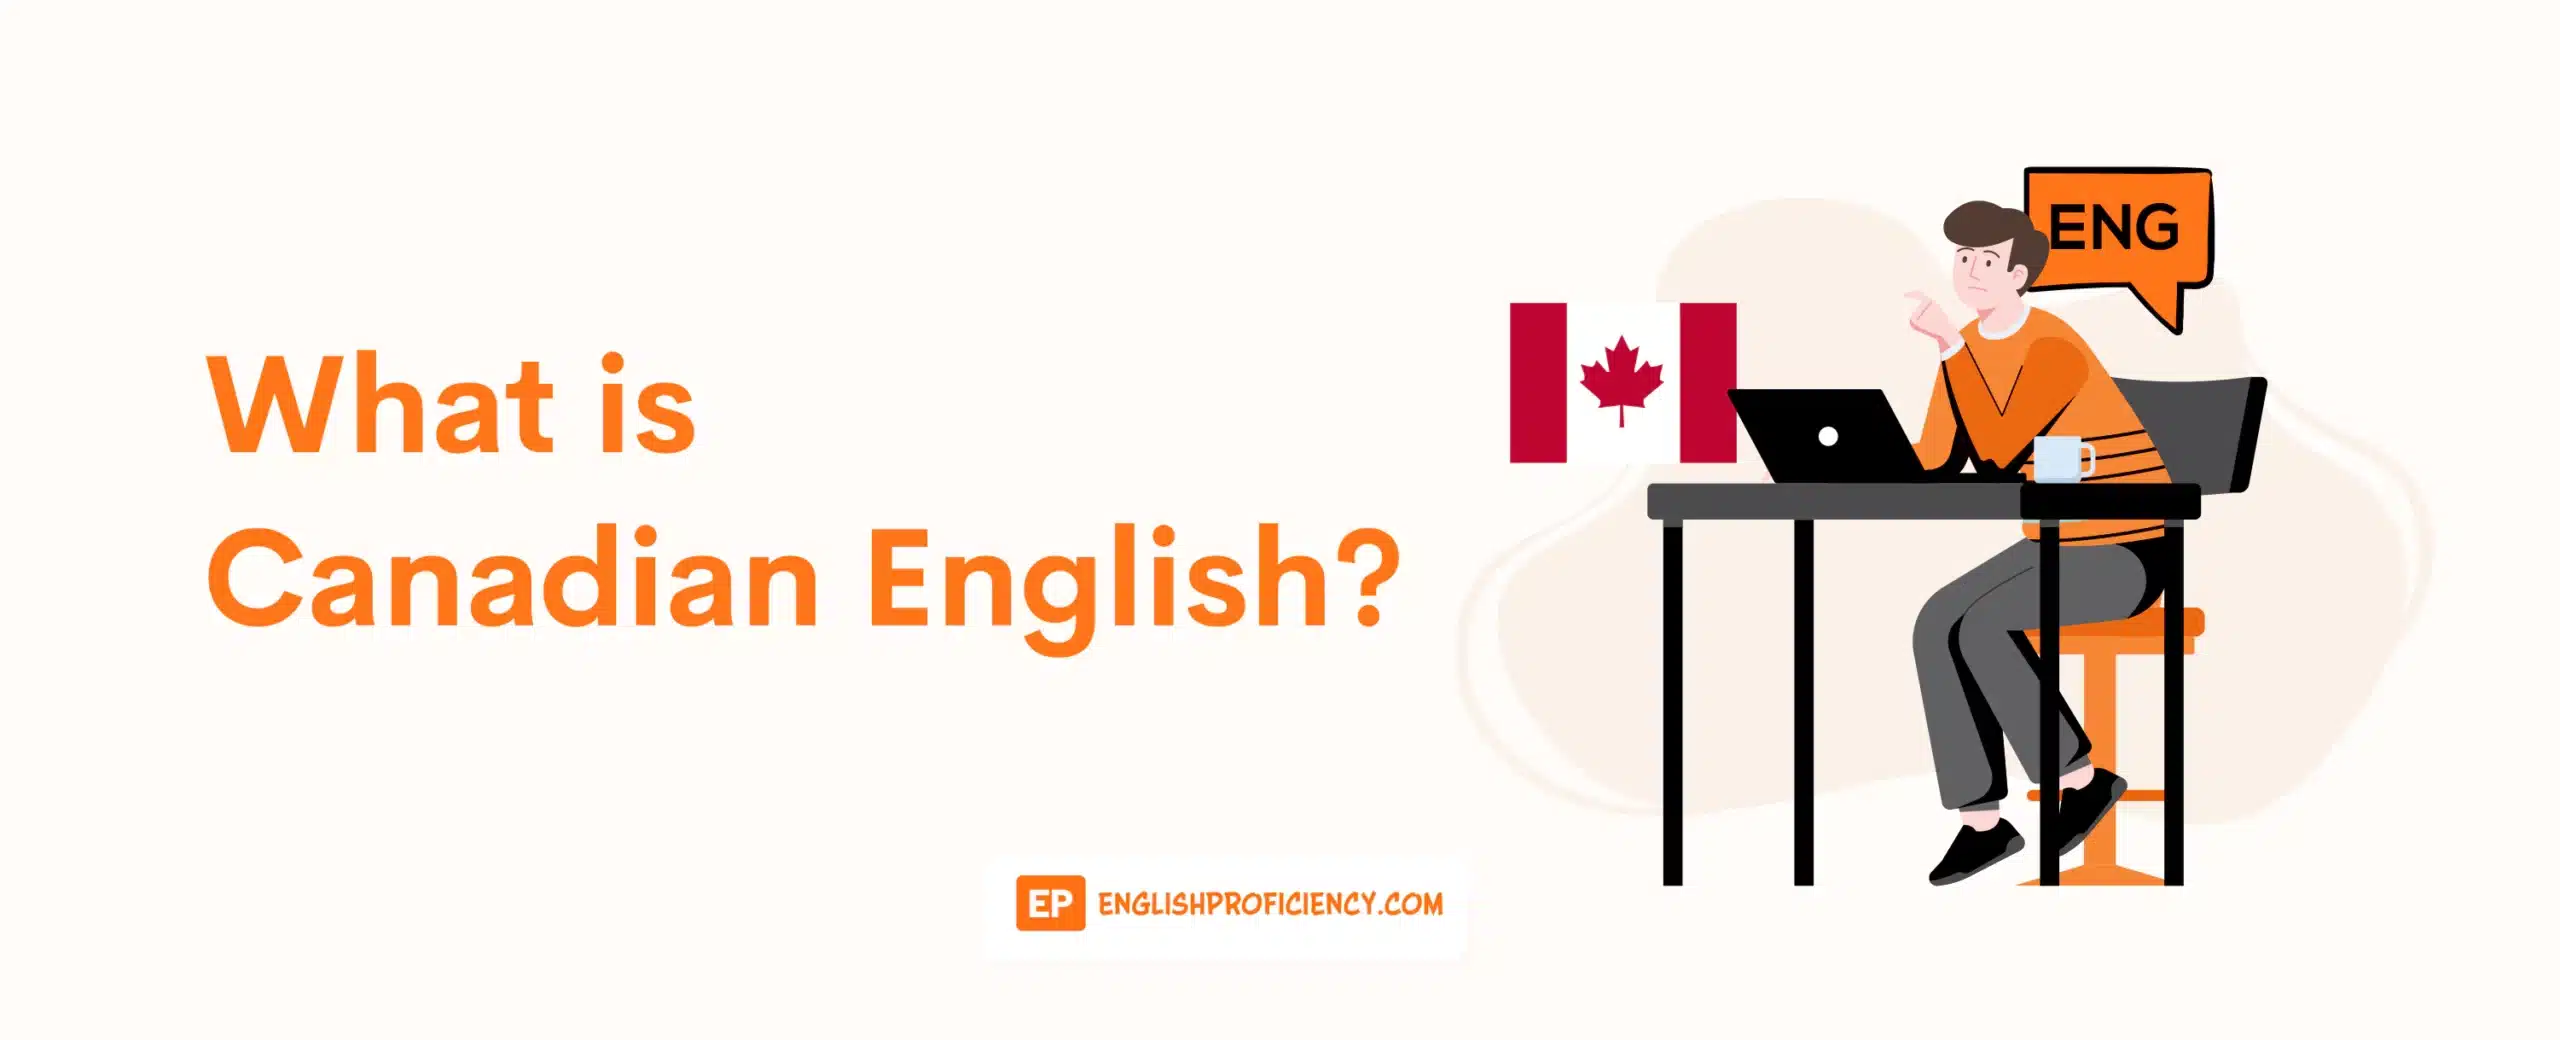 What is Canadian English